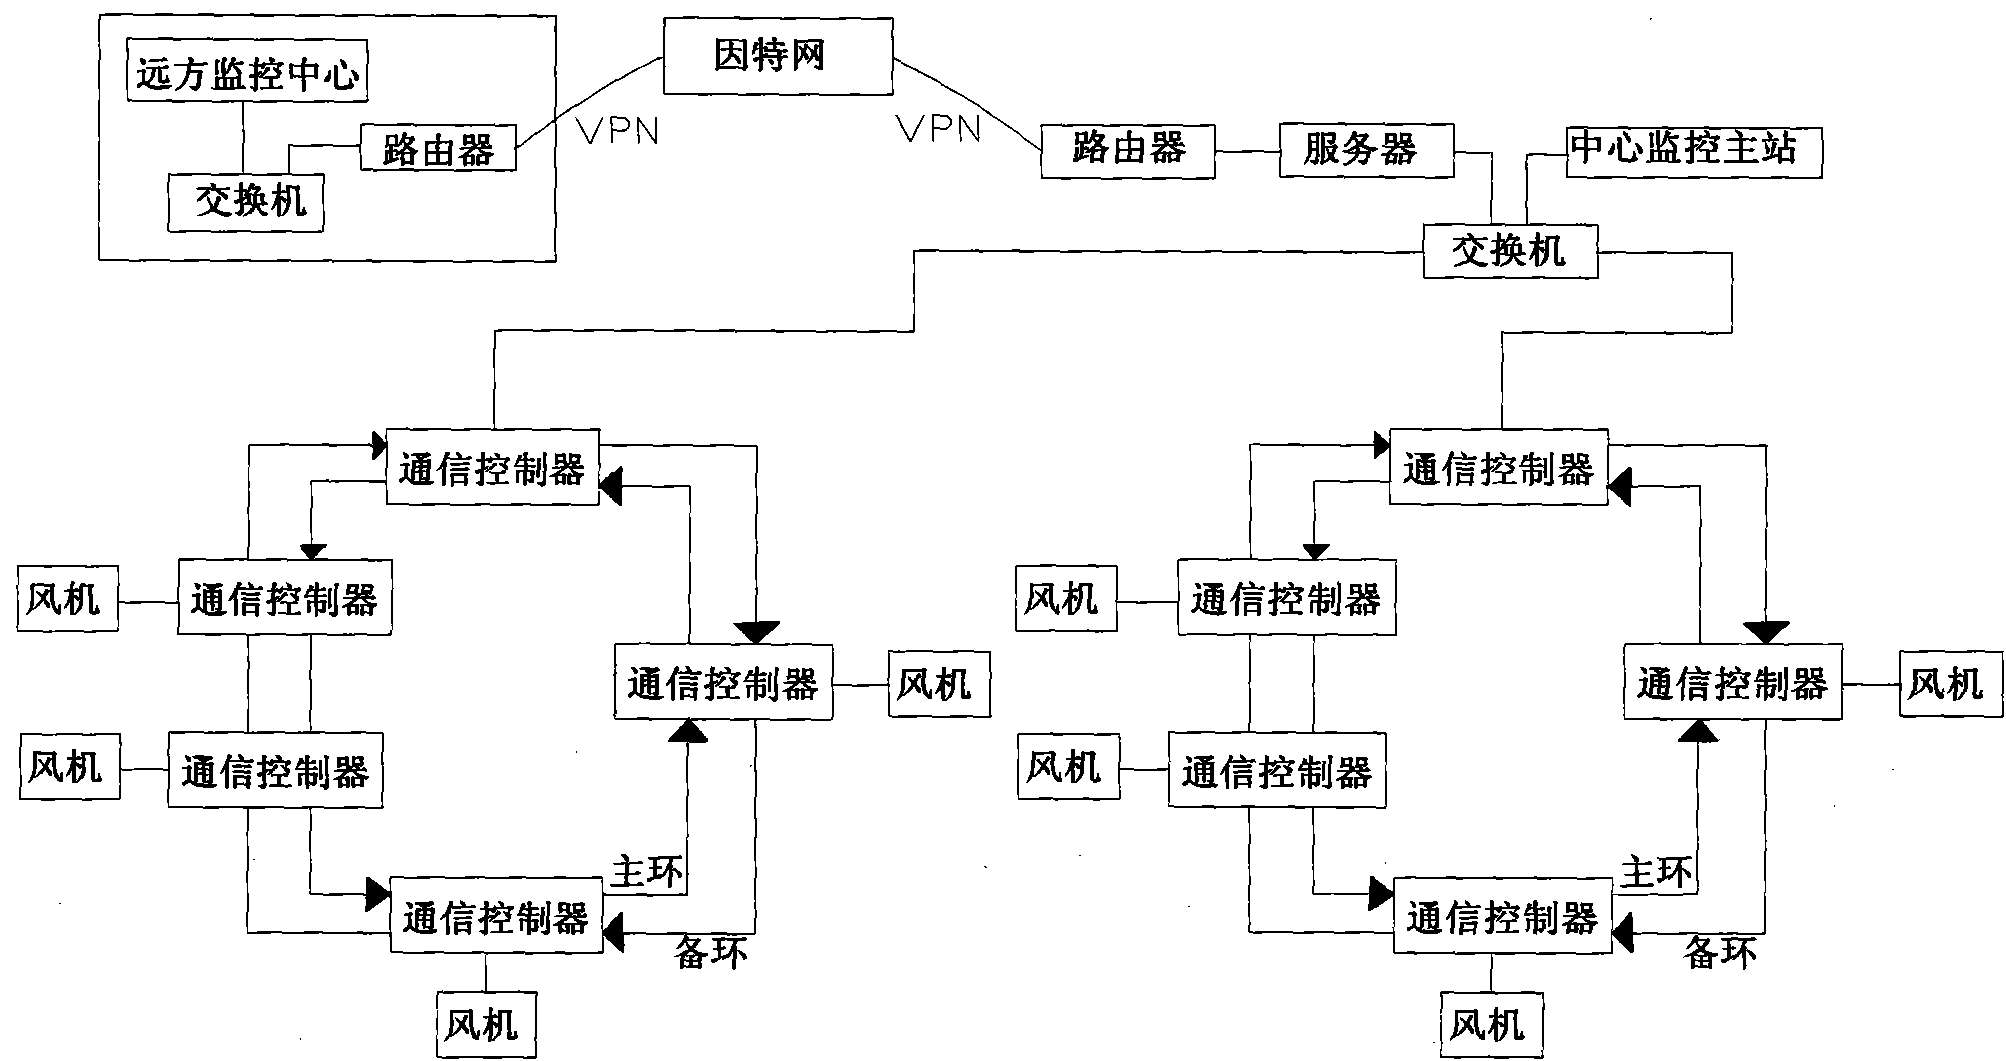 Communication system for wind power station